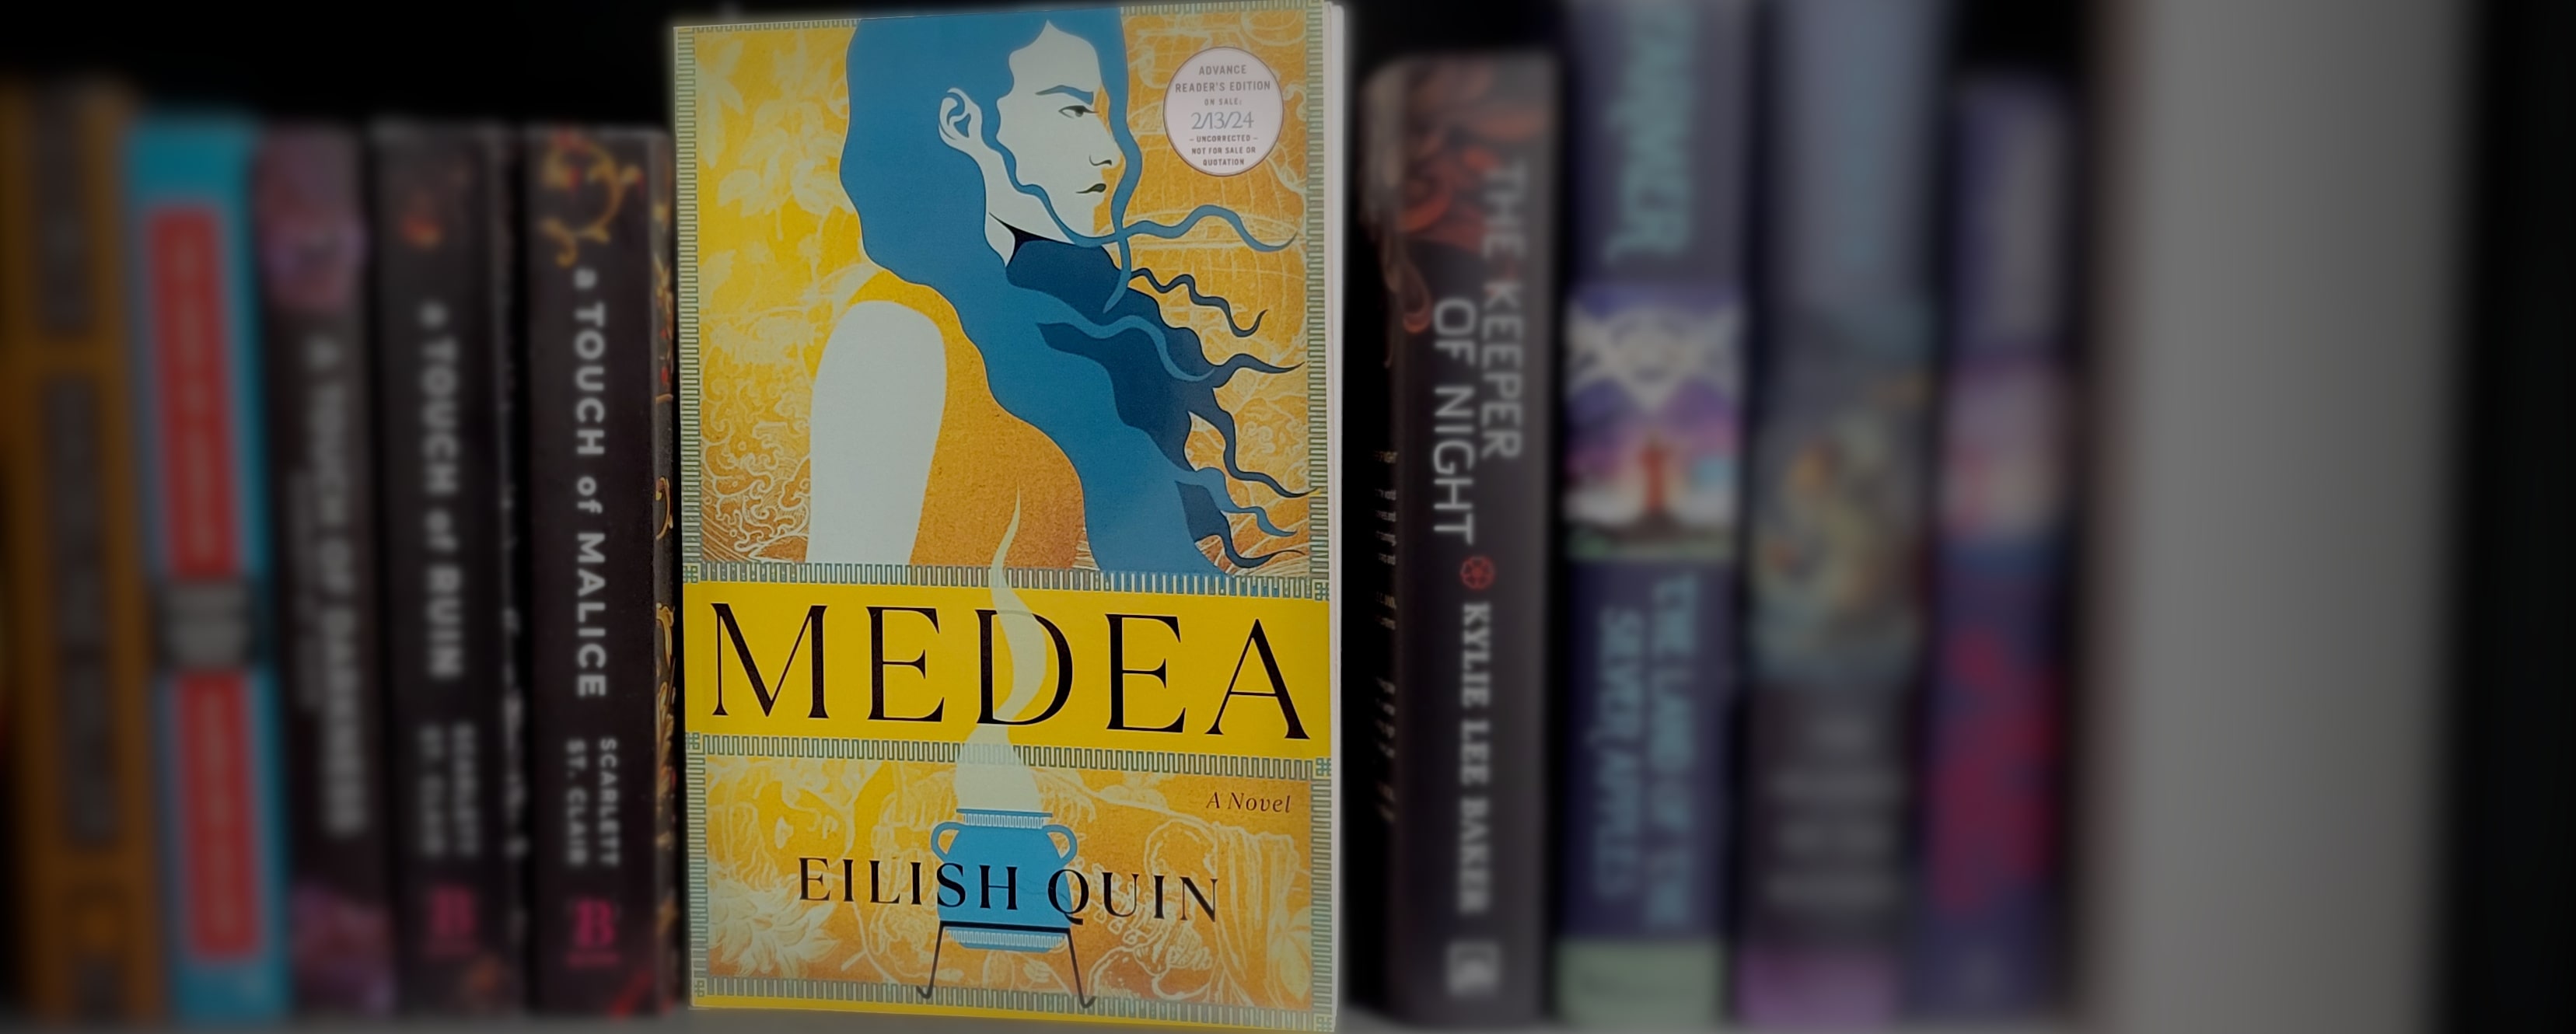 Book Cover of Medea by Eilish Quin